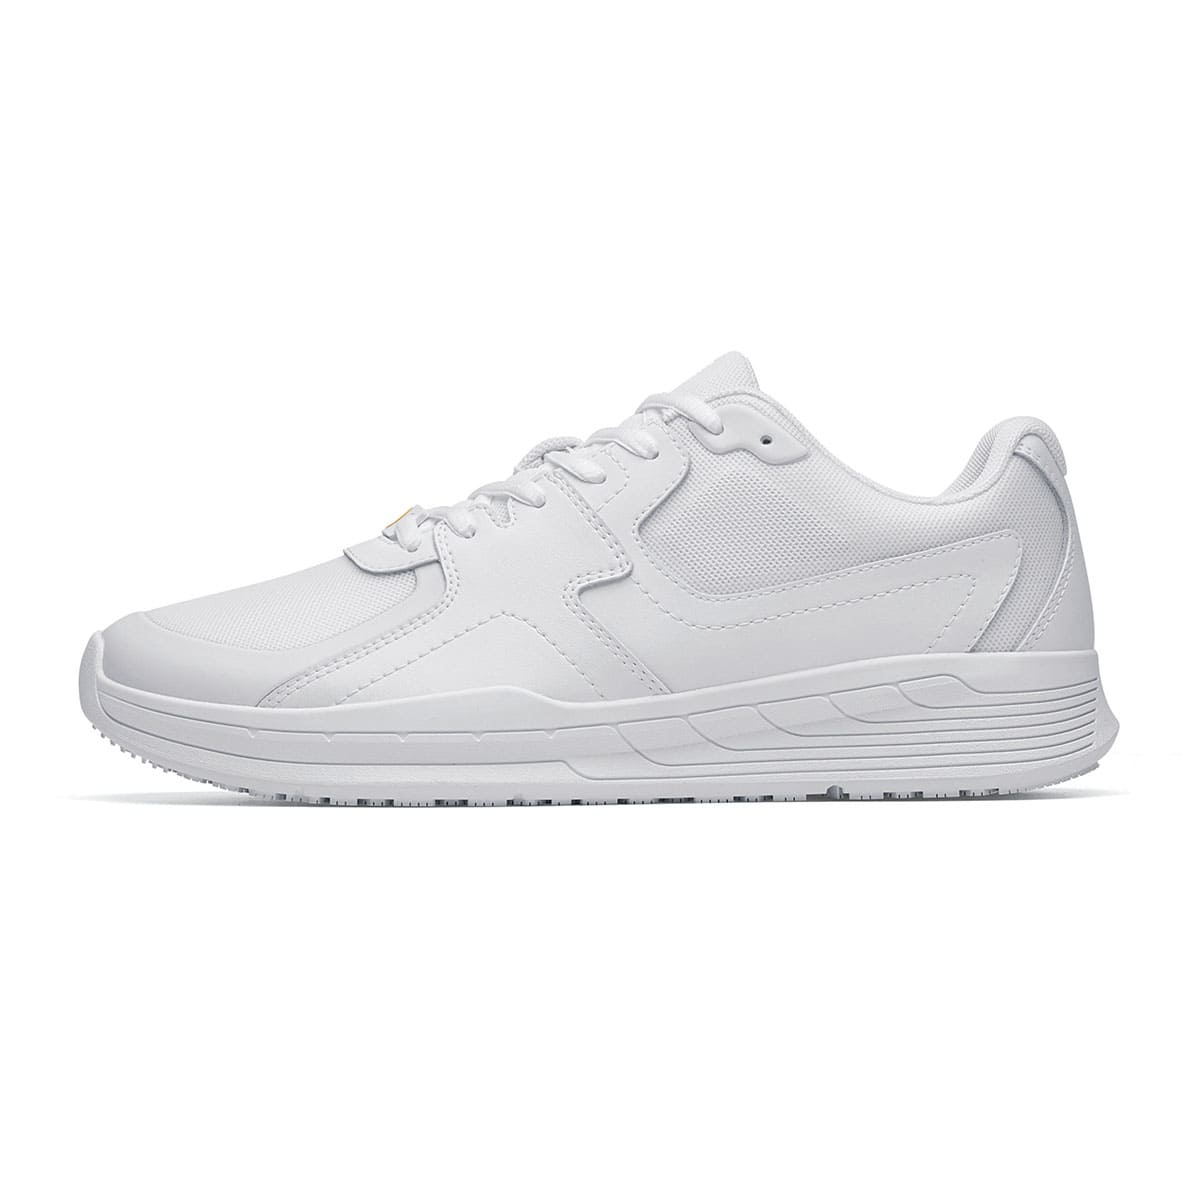 The Shoes for Crews Condor II Unisex White trainers feature a slip-resistant outsole and an easy-to-clean, breathable fabric upper with SpillGuard protection, seen from the left.